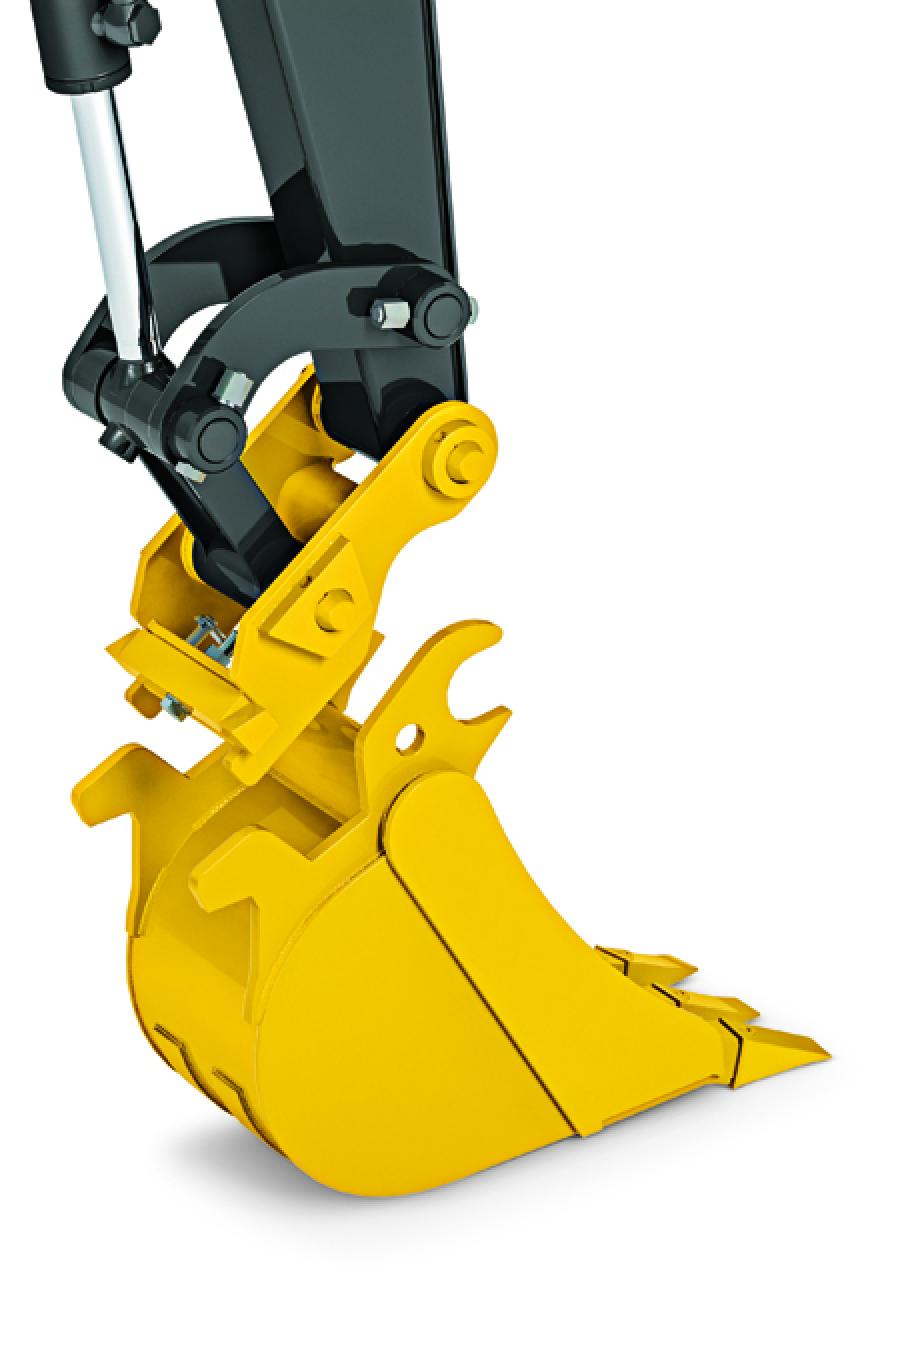 The hydraulic coupler is designed for 35G, 50G and 60G excavators and is compatible with the ever-expanding lineup of John Deere Worksite Pro attachments.